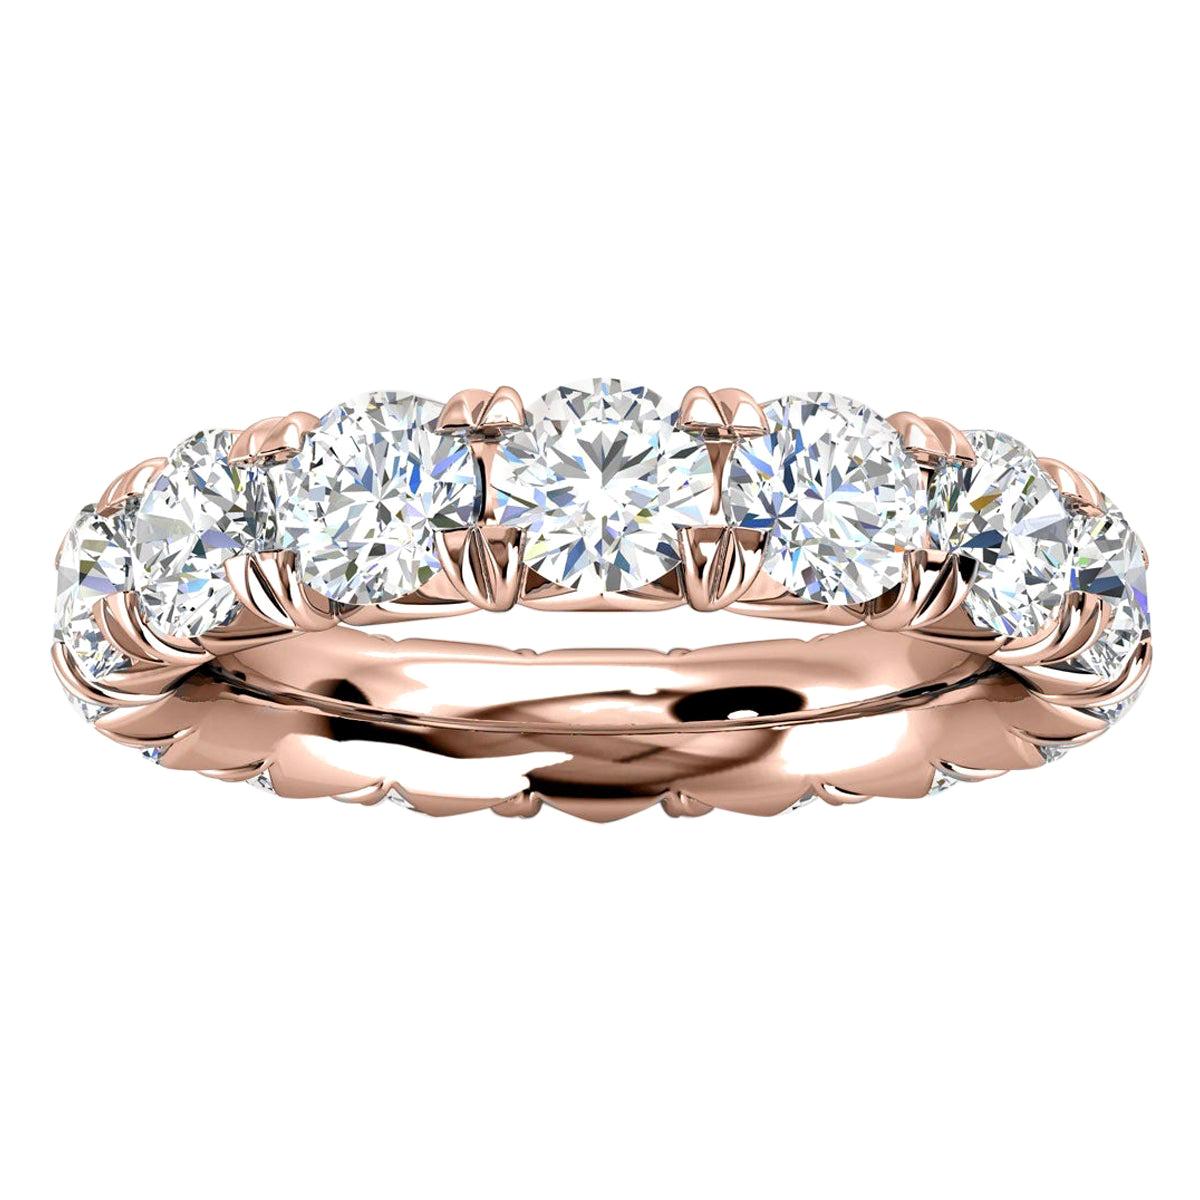 For Sale:  14K Rose Gold Mia French Pave Diamond Eternity Ring '4 Ct. Tw'